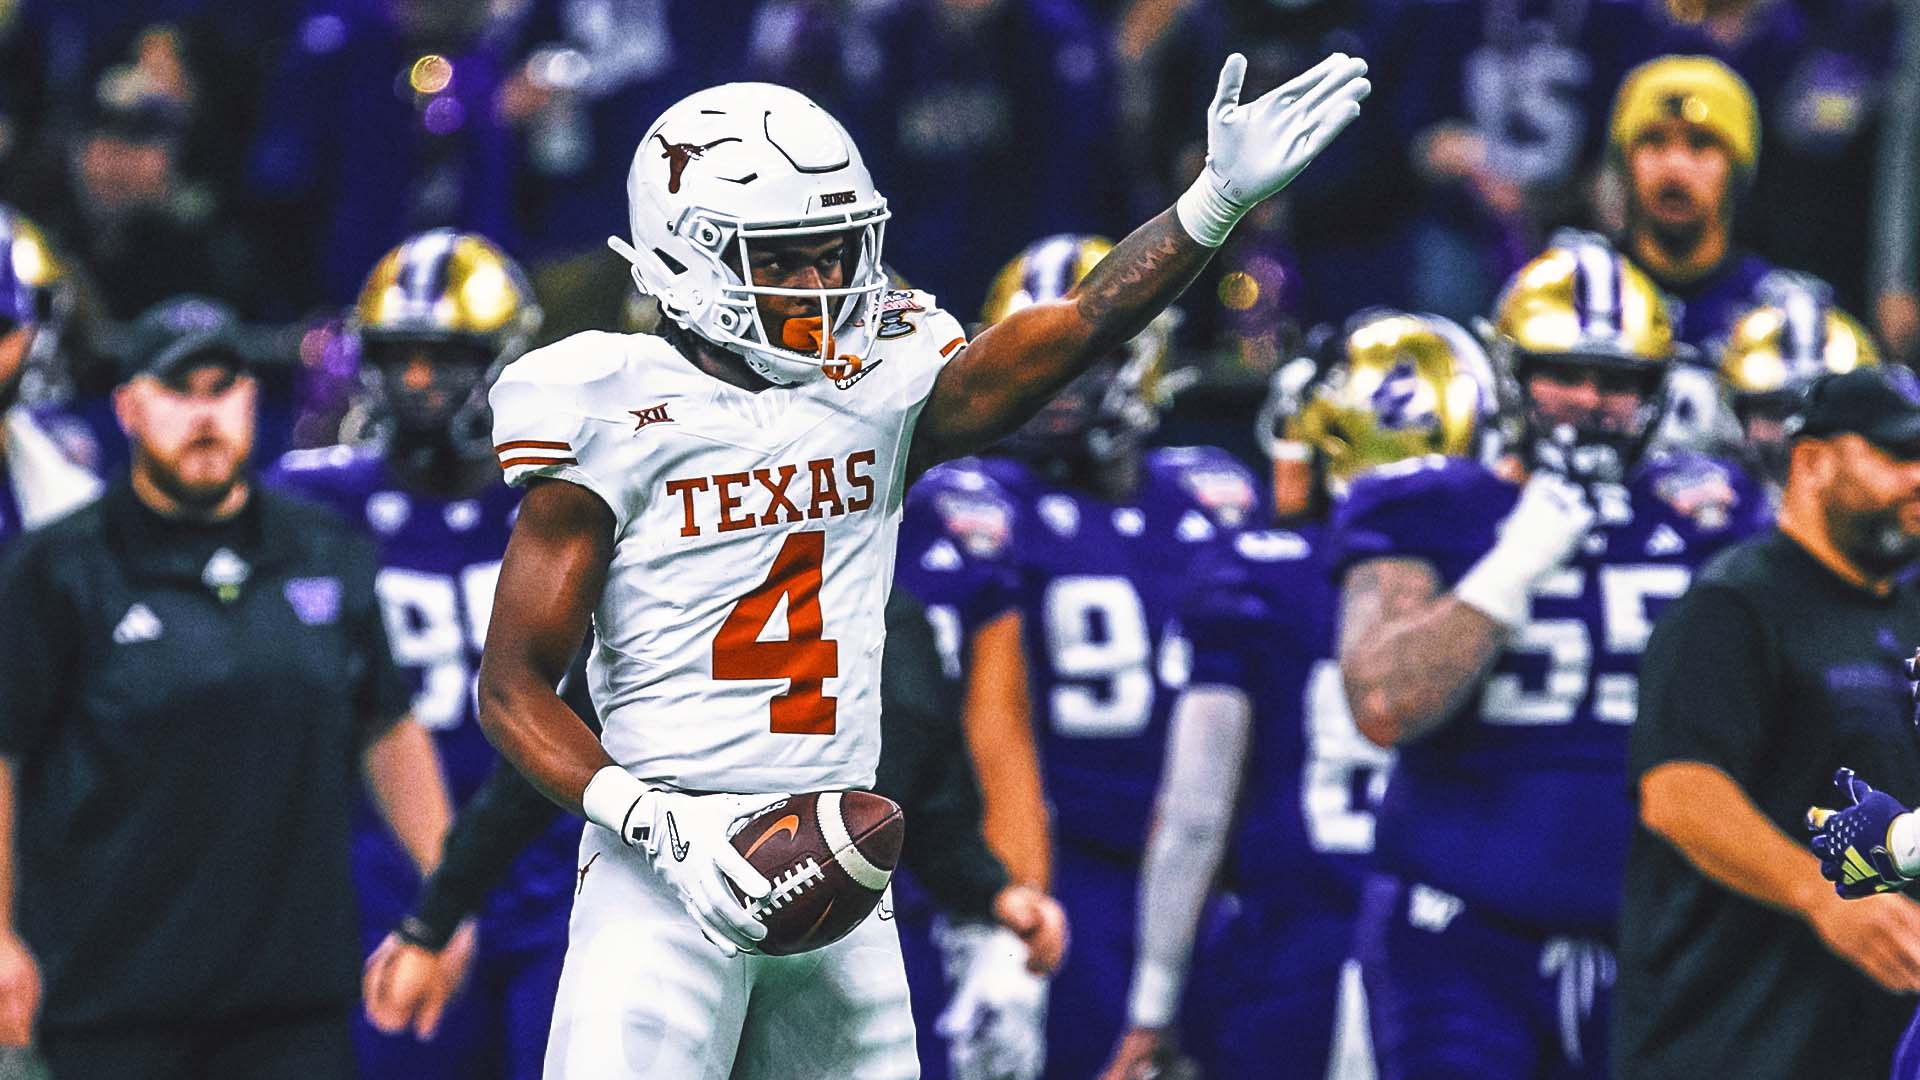 Texas is clearly on the rise, despite disappointing finish